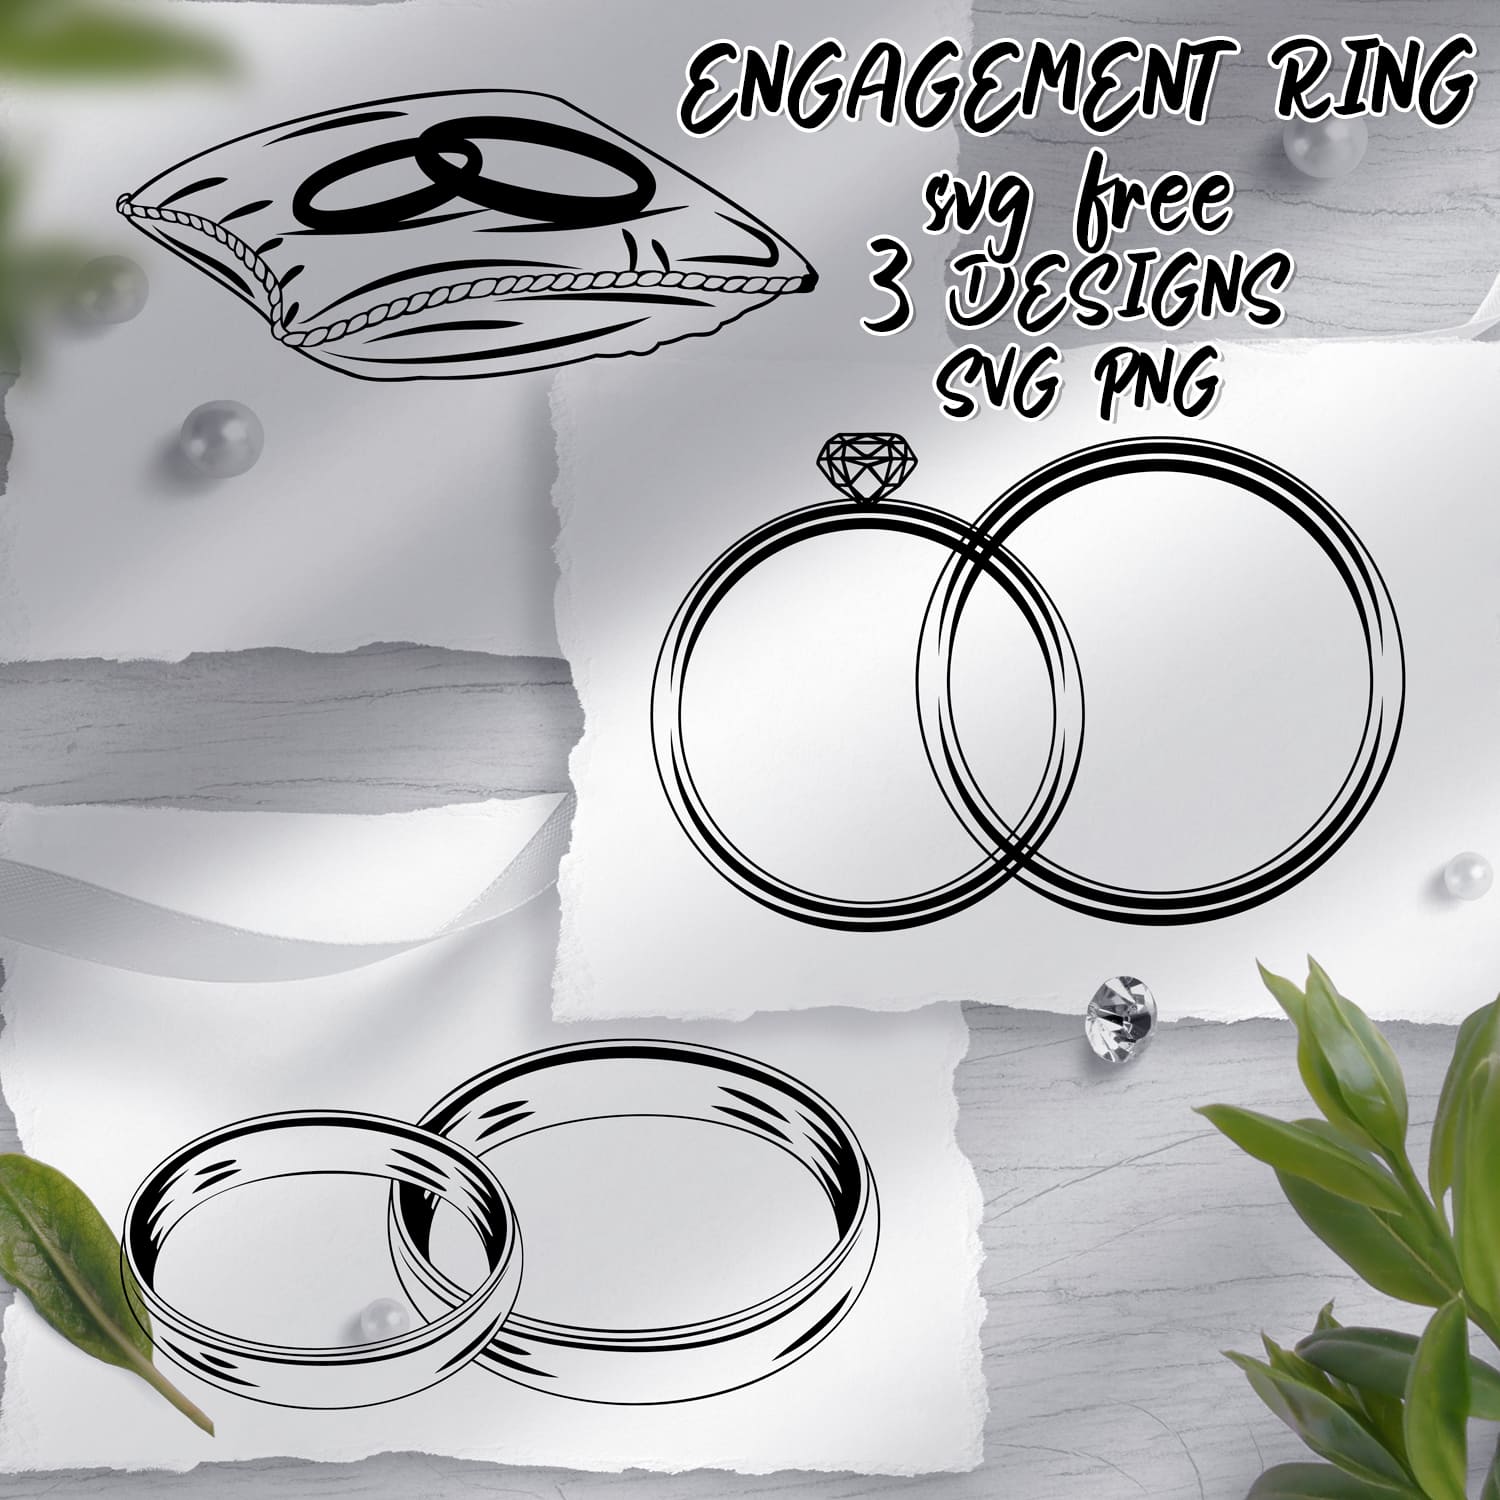 SIMPLE STERLING SILVER 925 NICKEL FREE SOLITAIRE ENGAGEMENT & WEDDING RING  SET | eBay